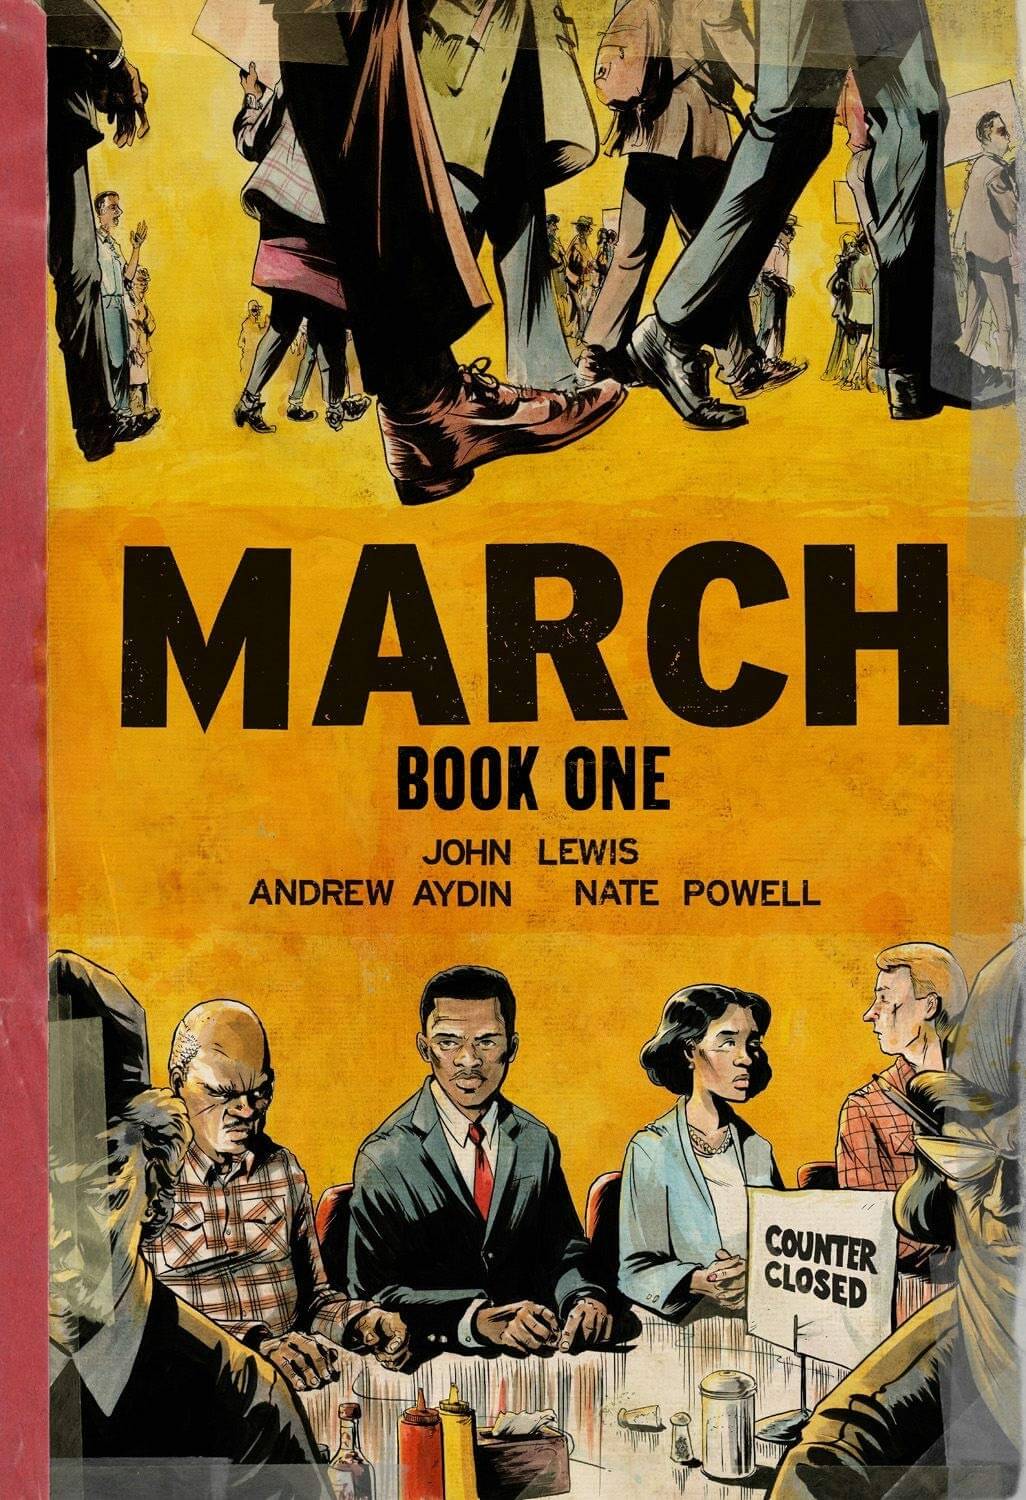 March, by John Lewis, Andrew Aydin and Nate Powell